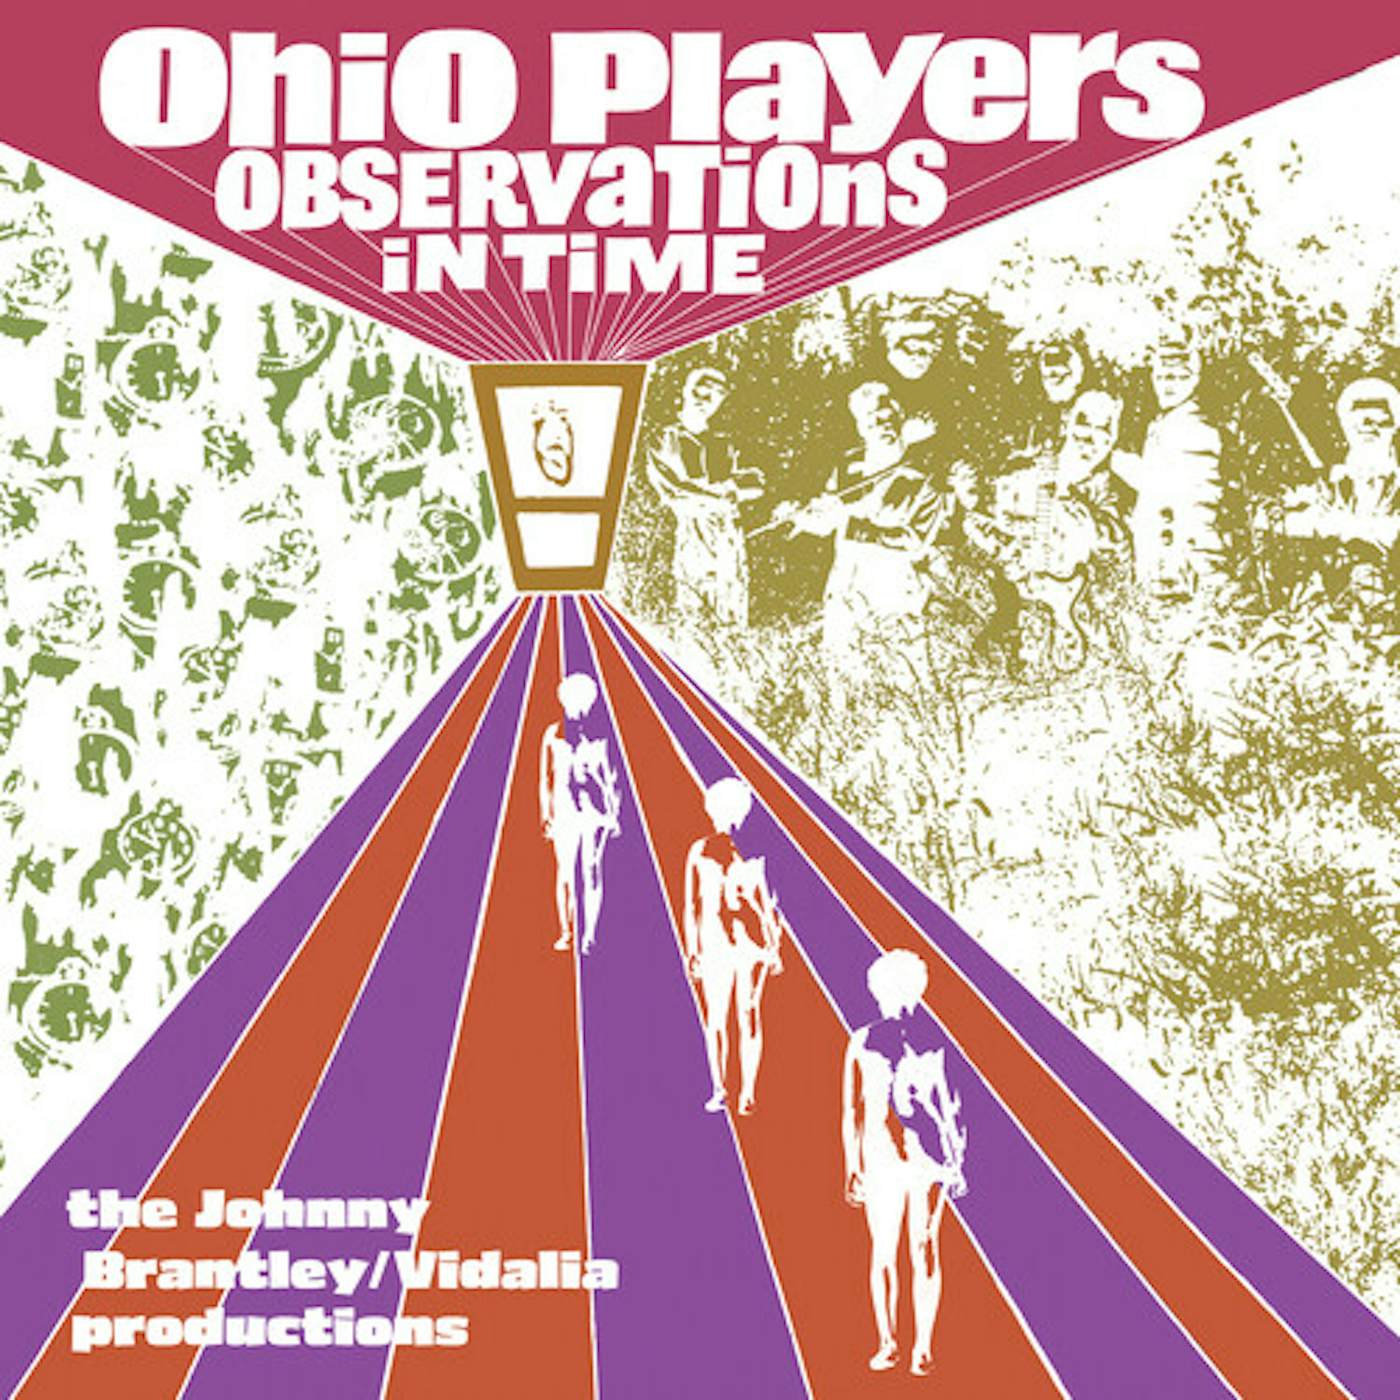 Ohio Players OBSERVATIONS IN TIME: THE JOHNNY BRANTLEY/VIDALIA CD